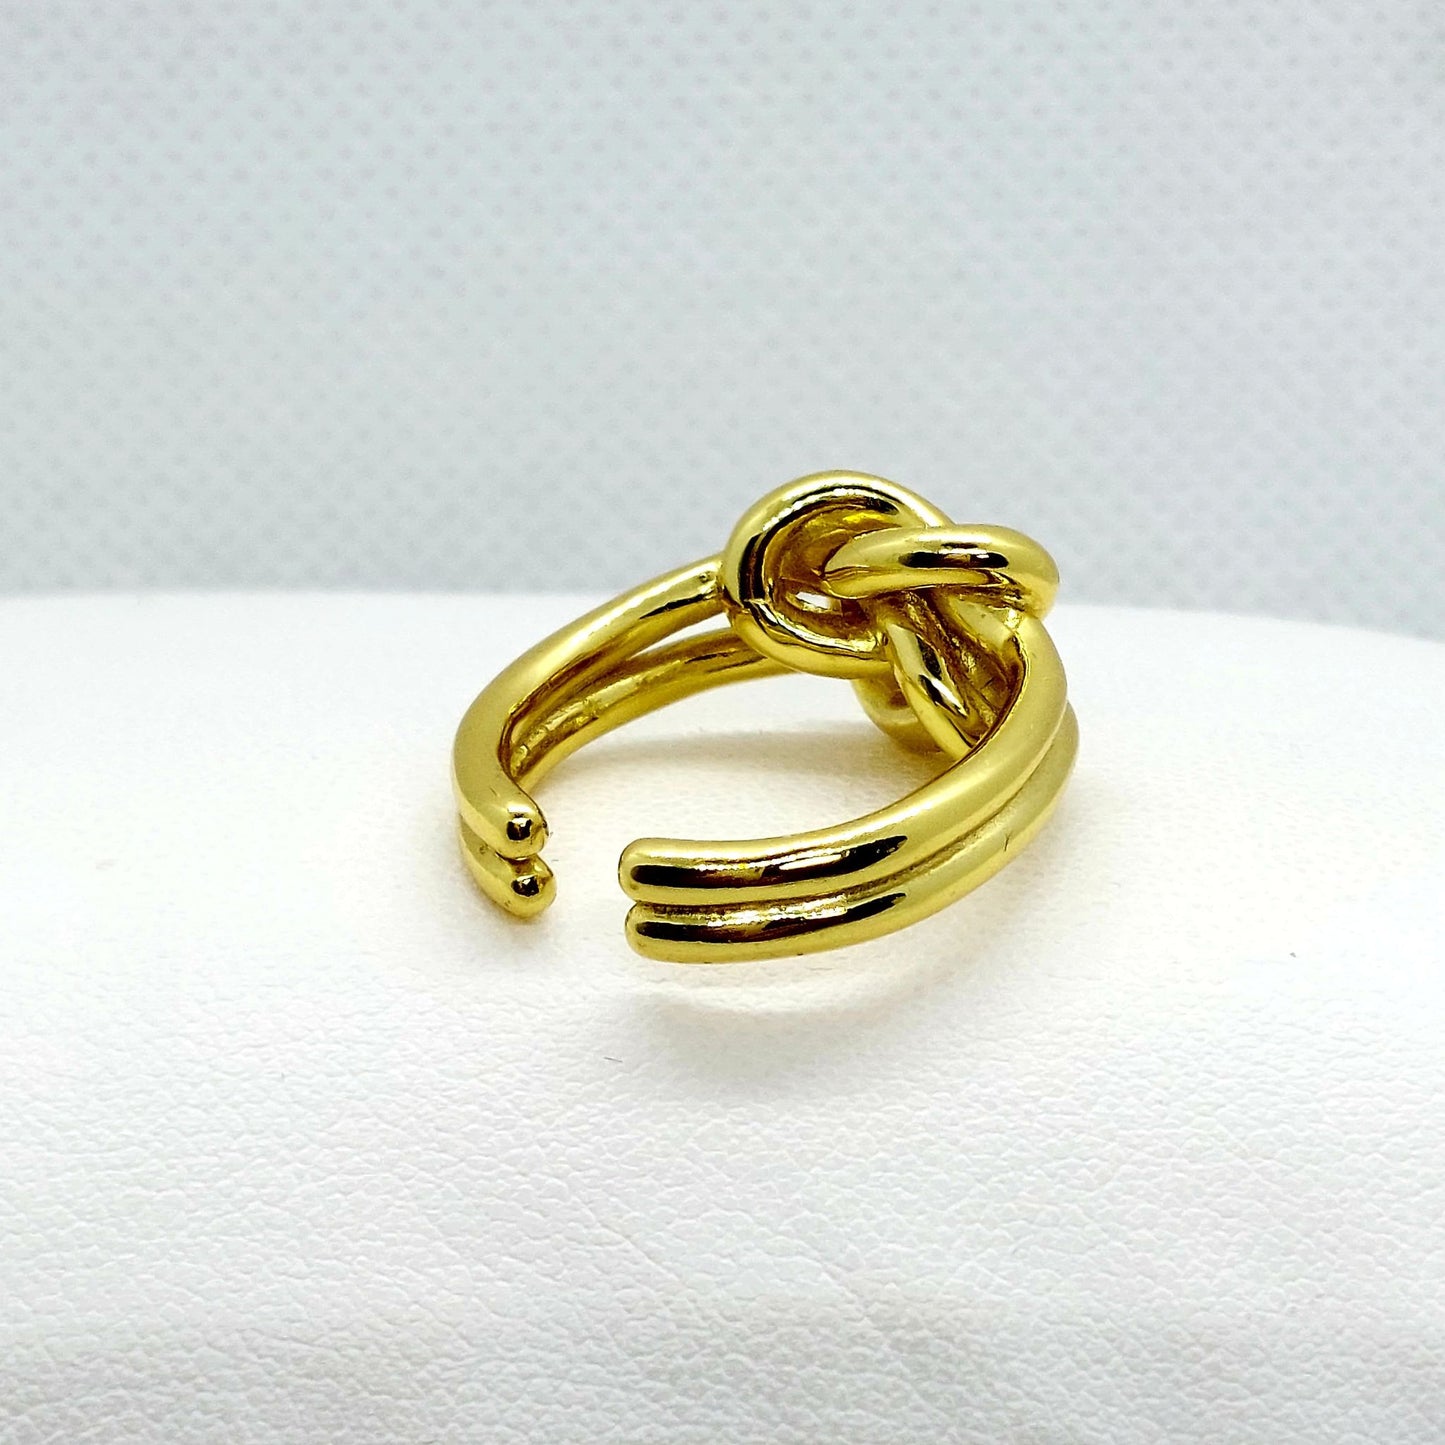 Big Knot Sterling Silver Ring - Resizeable - Gold Plated